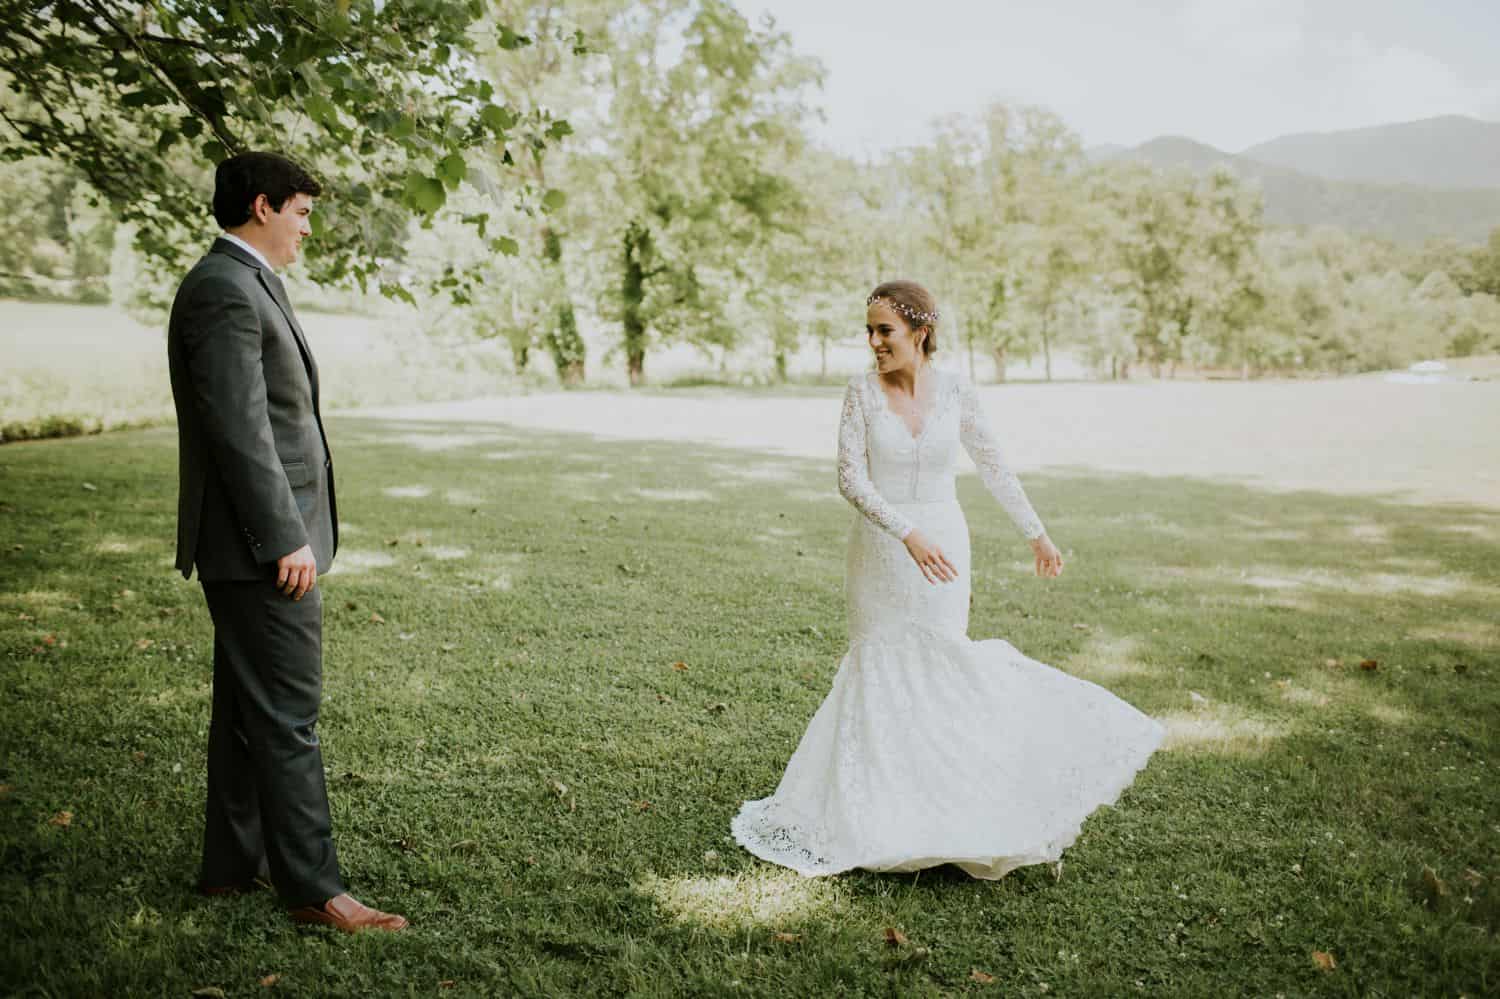 A bride in a long-sleeved lace dress prepares to twirl under a tree during her first look with her husband.